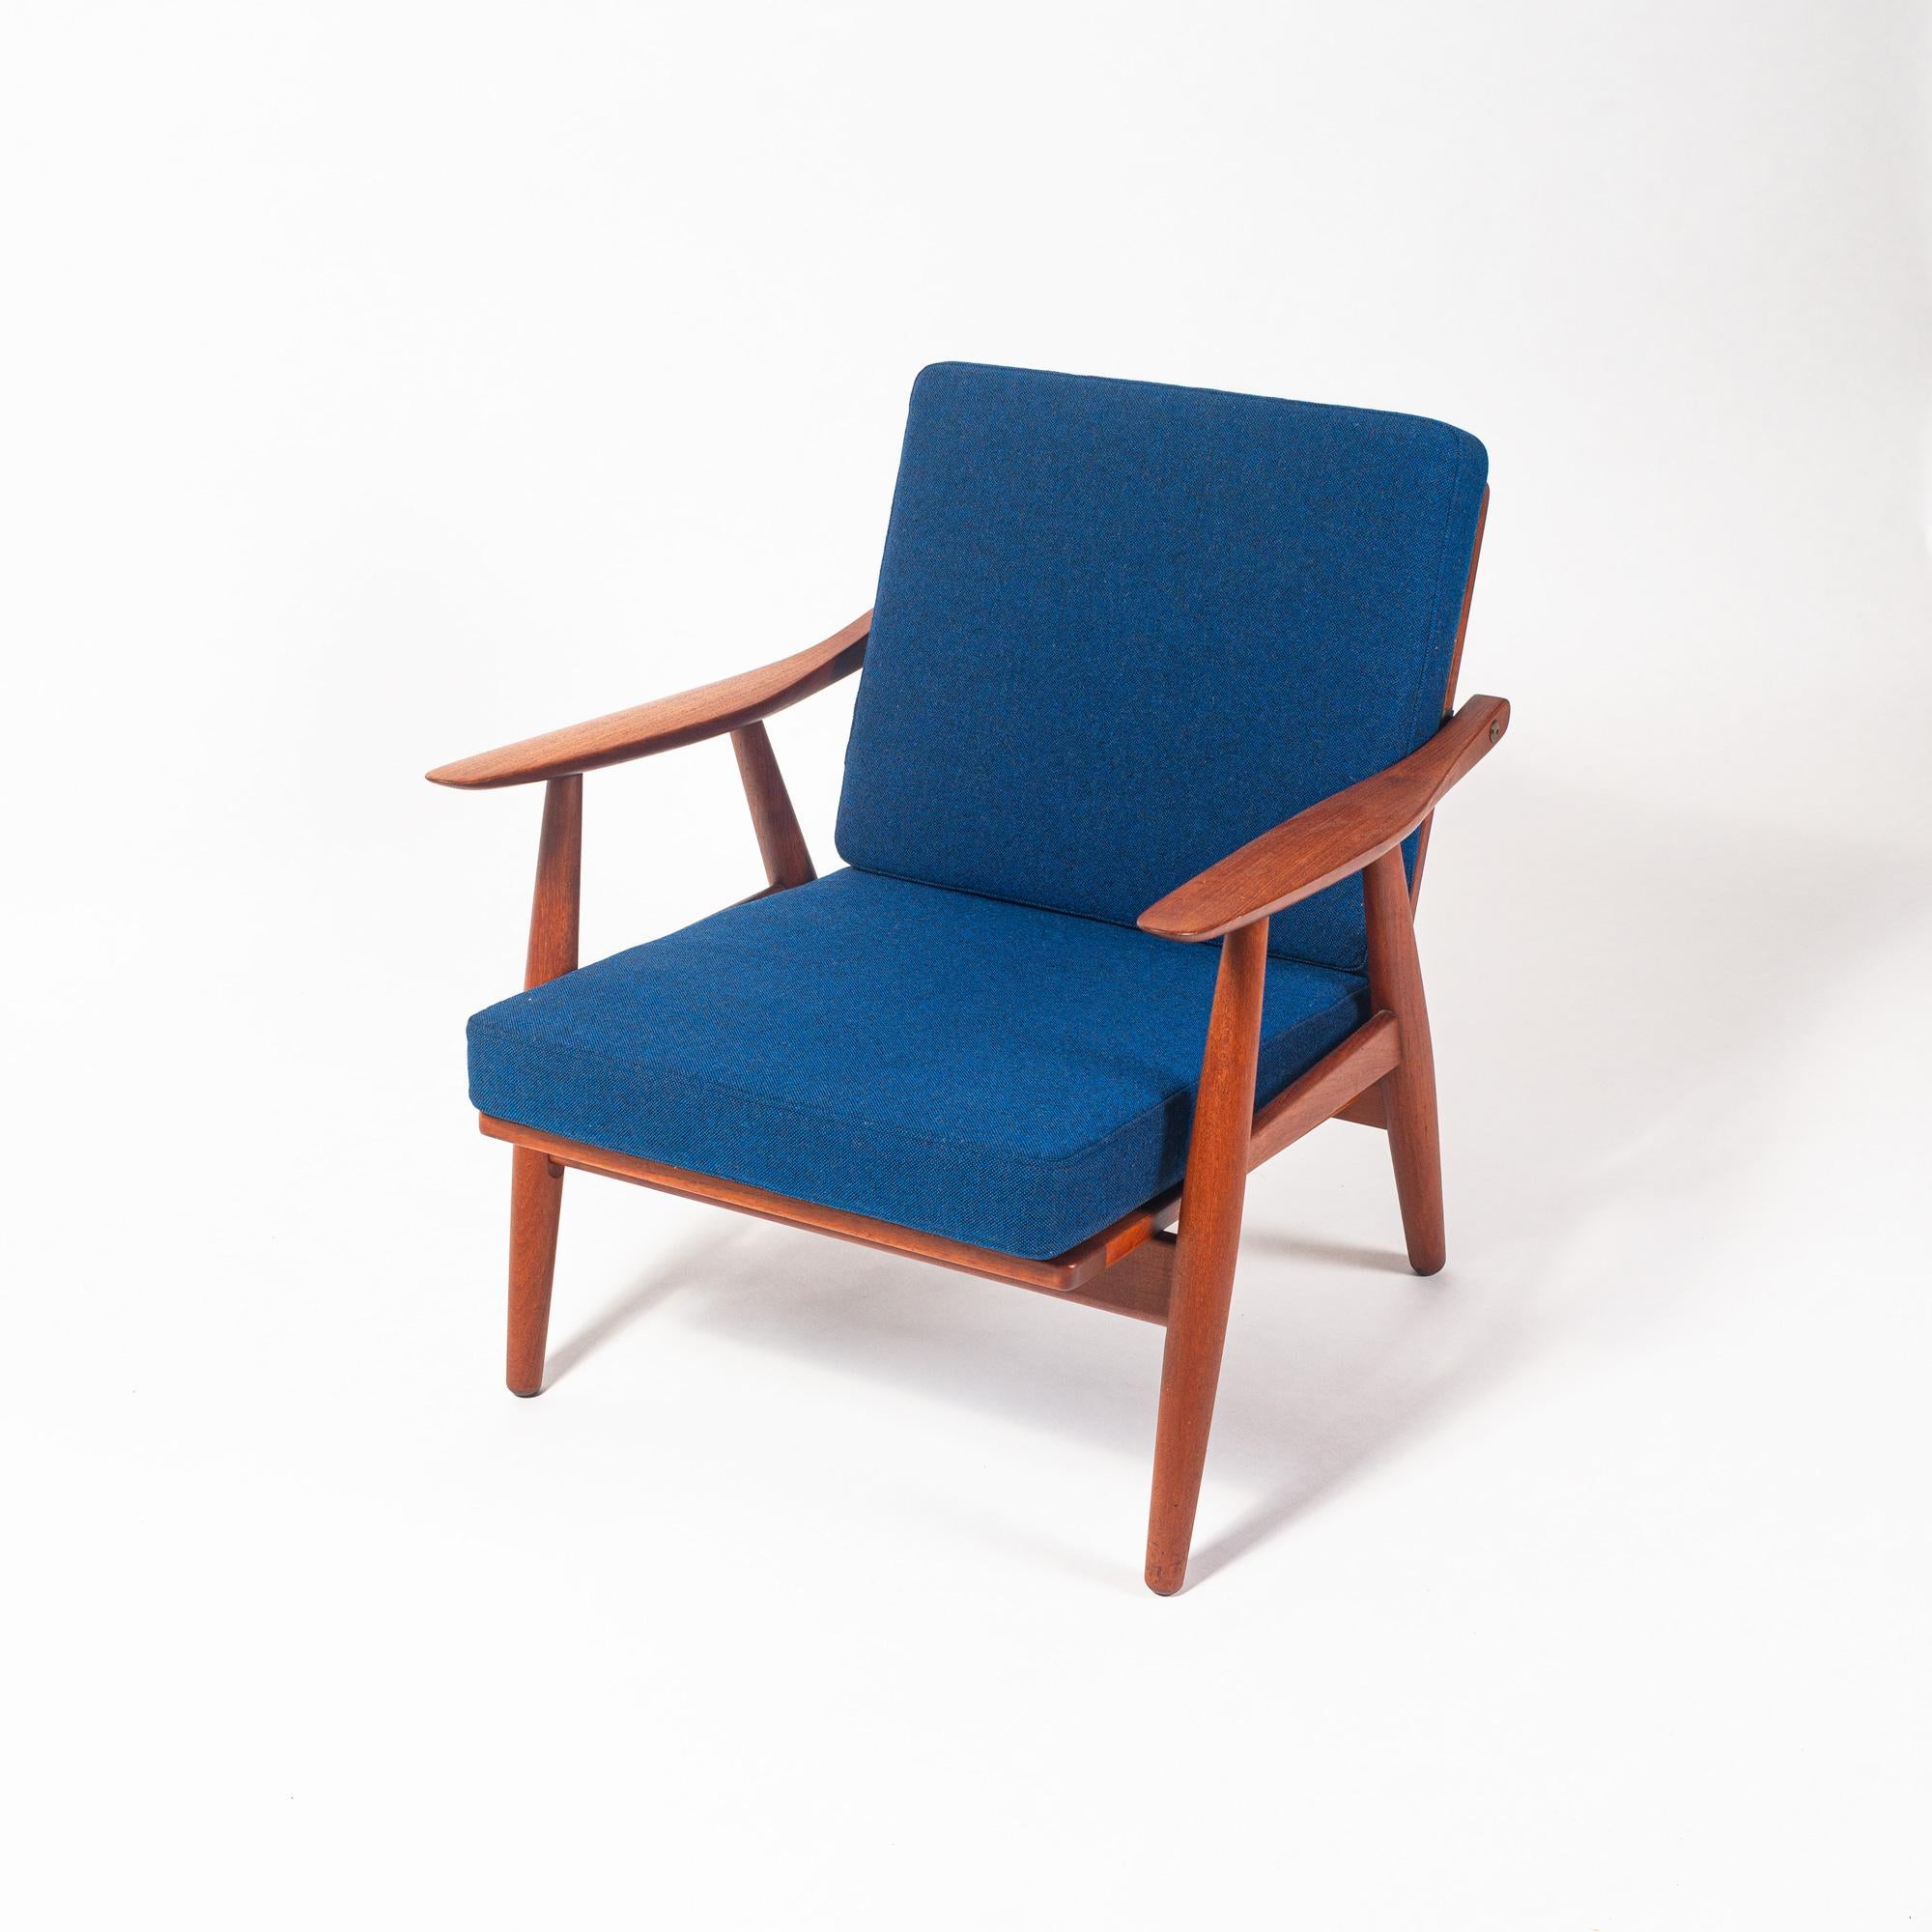 Pair of Hans Wegner GE-270 lounge chairs in solid teak and new royal blue wool upholstery, circa 1950s. This lounge chair has a sculpted solid teak frame with exposed, bespoke brass fittings. Unlike the Wegner Cigar Series or other lounge chairs,